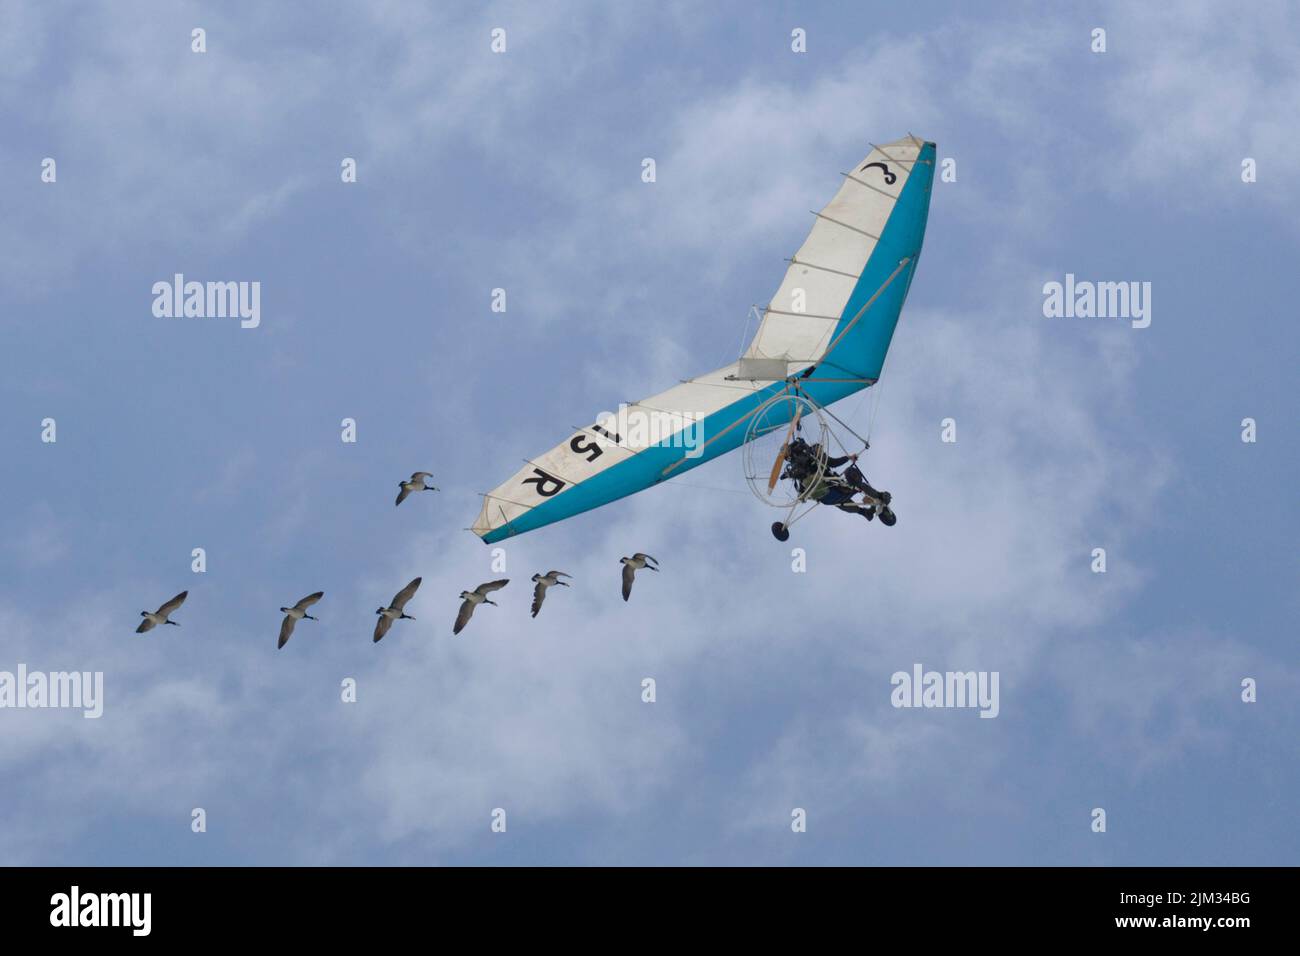 Christian Moullec, flying with geese Stock Photo